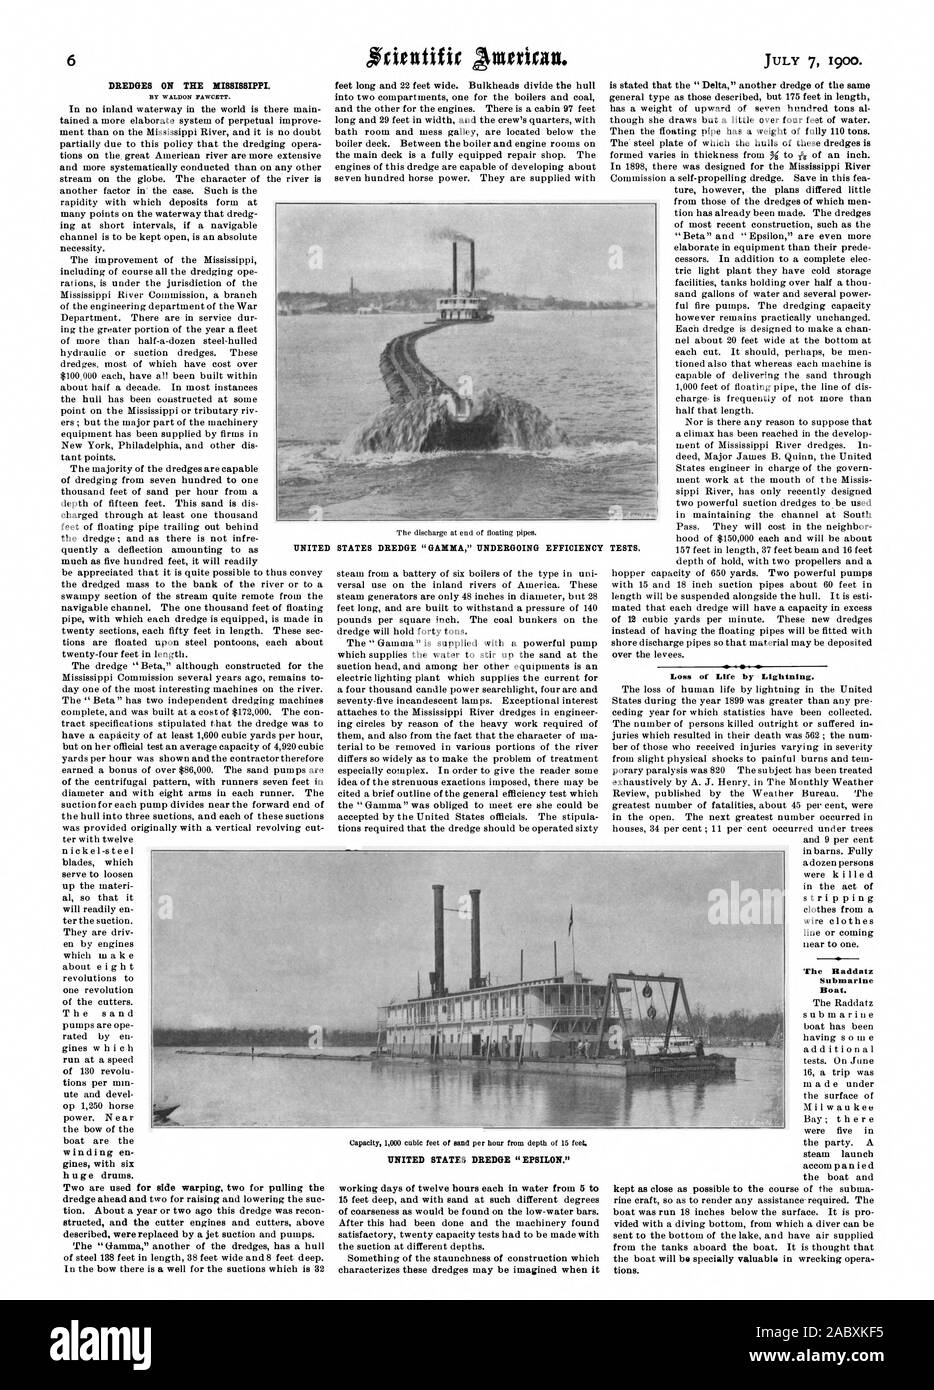 DREDGES ON THE MISSISSIPPI. UNITED STATES DREDGE 'EPSILON.' Loss of Life by Lightning. The Raddatz Submarine Boat. UNITED STATES DREDGE 'GAMMA' UNDERGOING EFFICIENCY TESTS., scientific american, 1900-07-07 Stock Photo